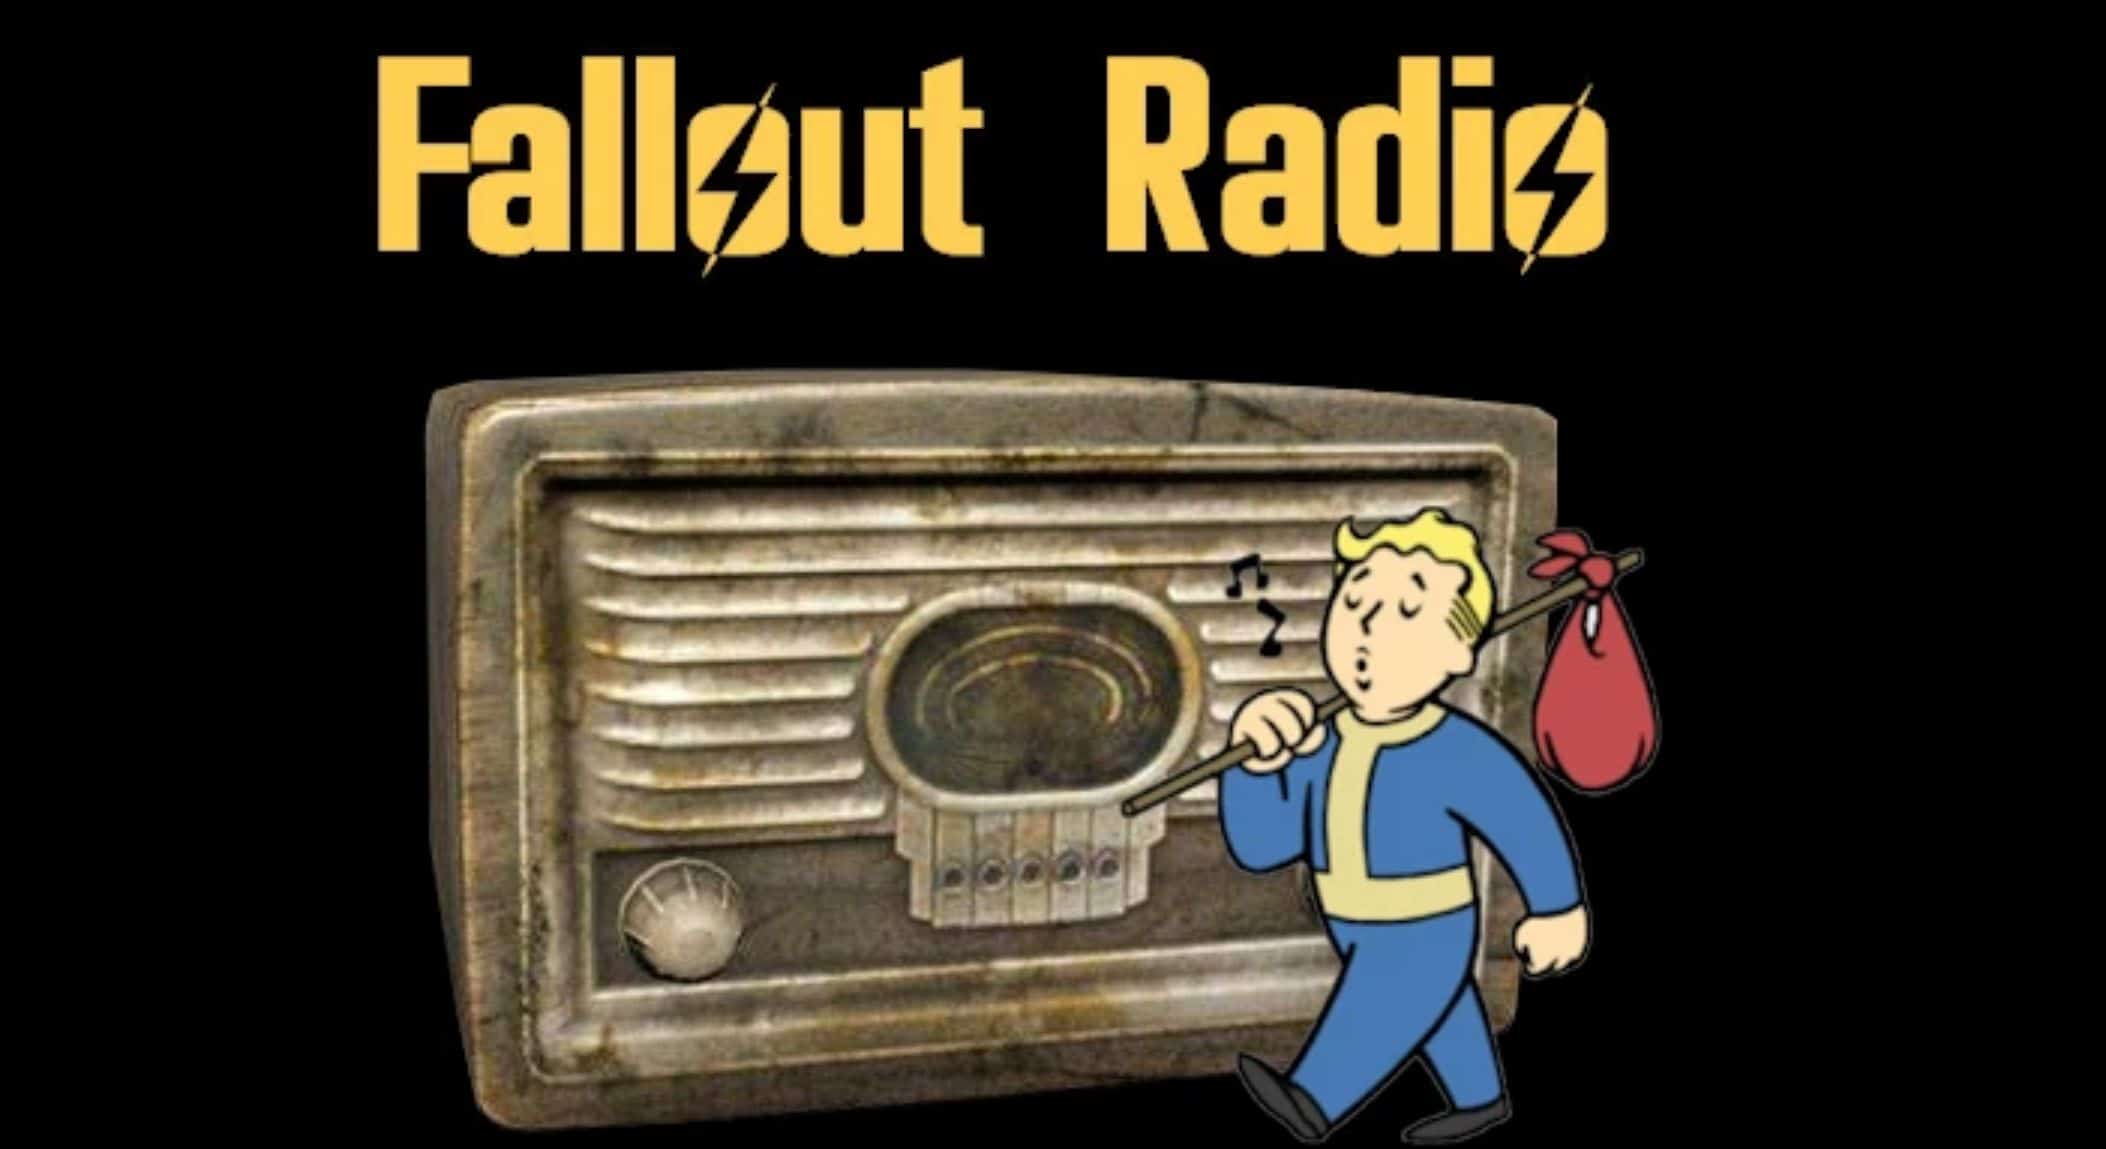 Радио фоллаут. Радио фоллаут 4. Fallout Radio. Fallout 4 антенна.